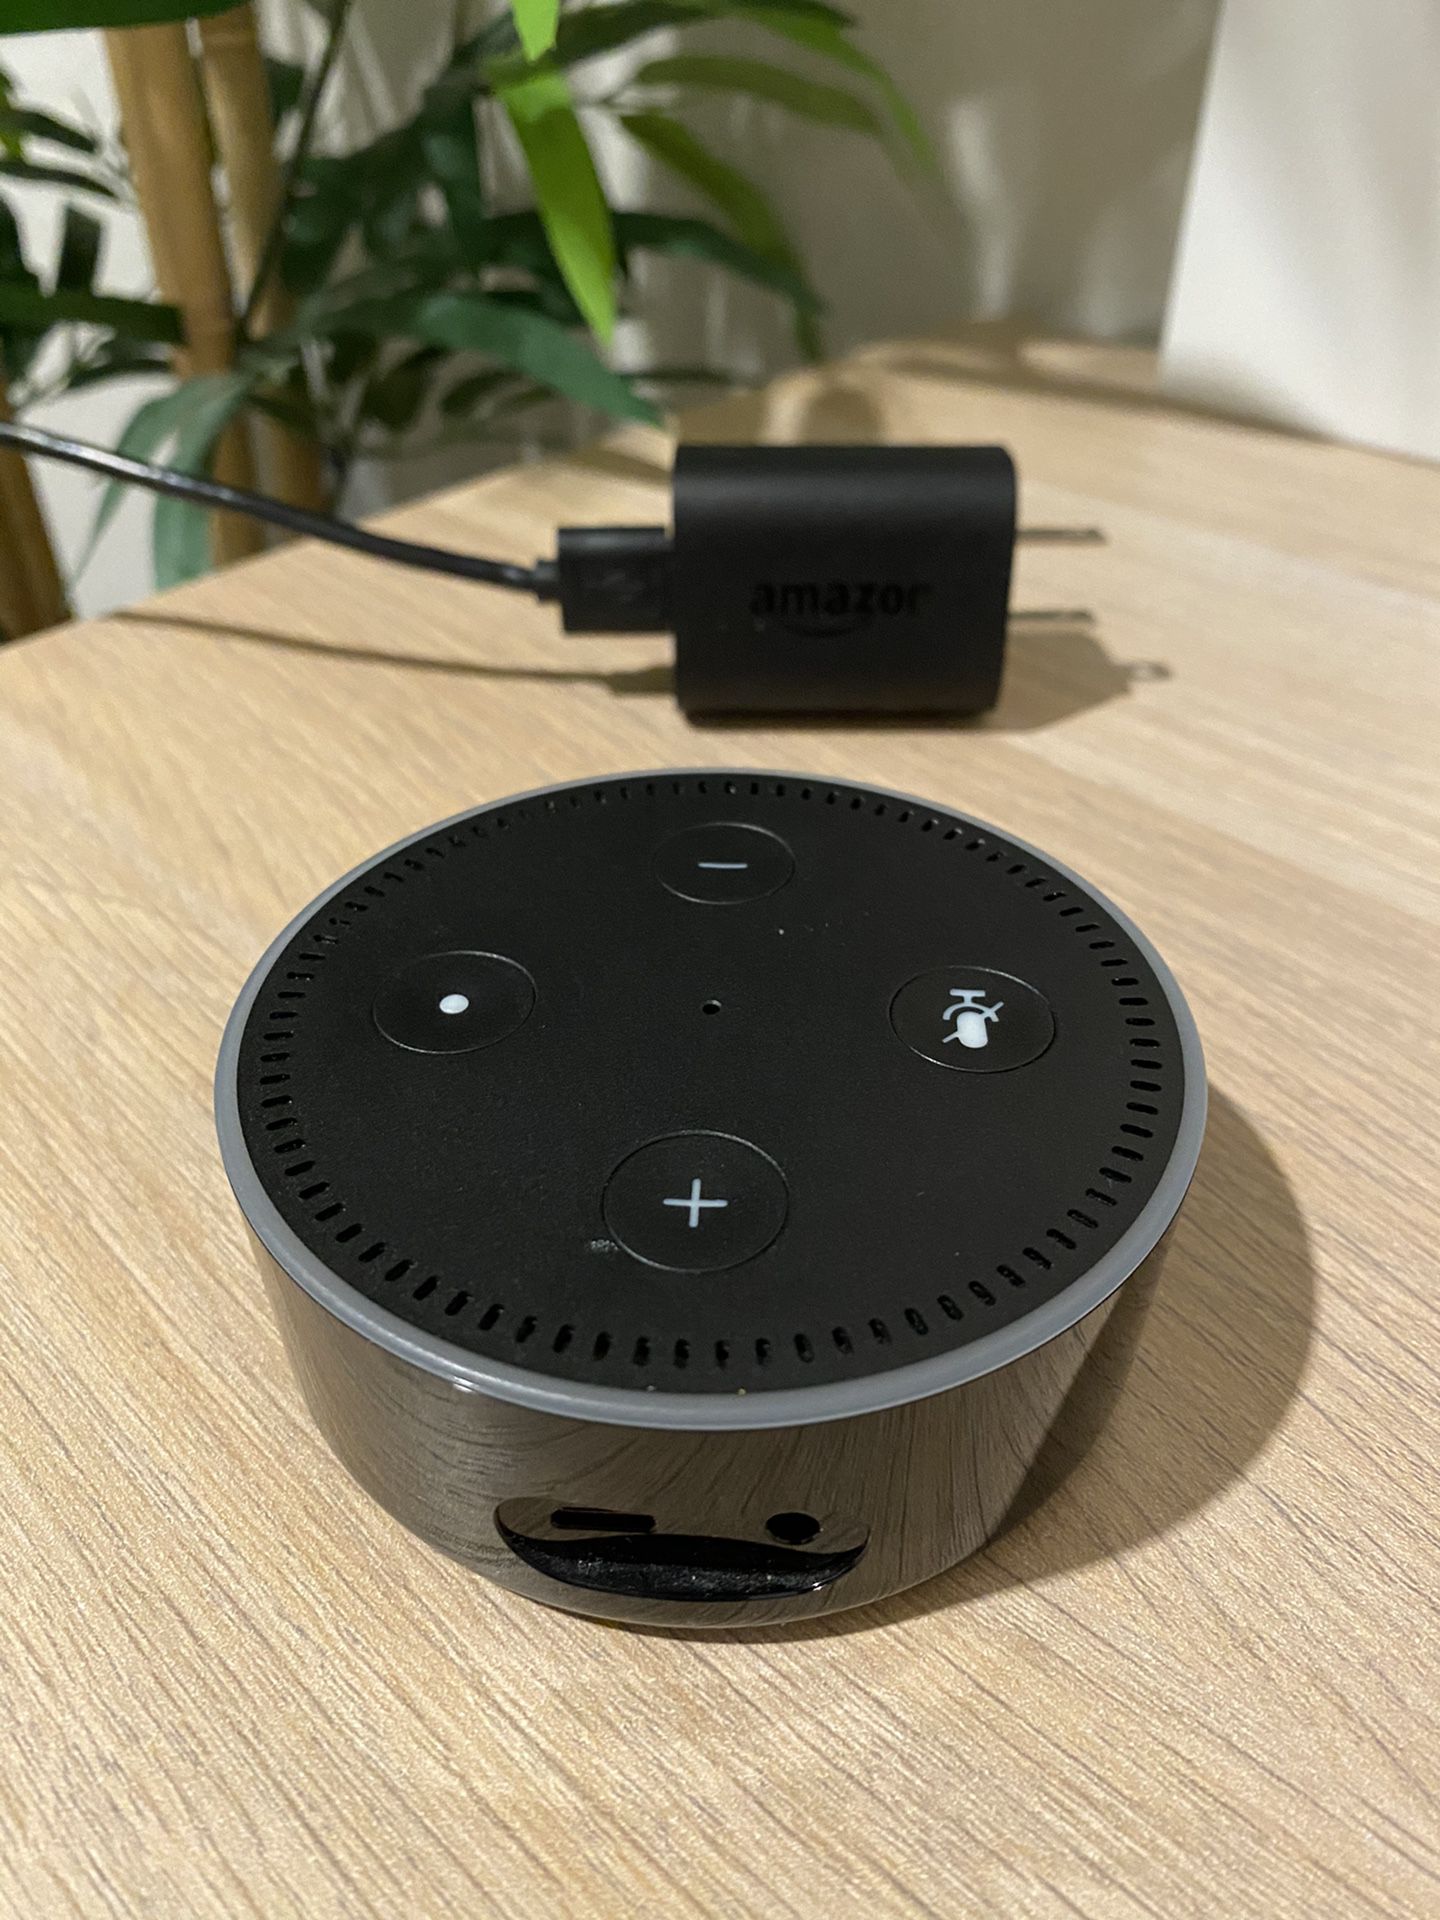 Amazon Echo Dot with charger $10